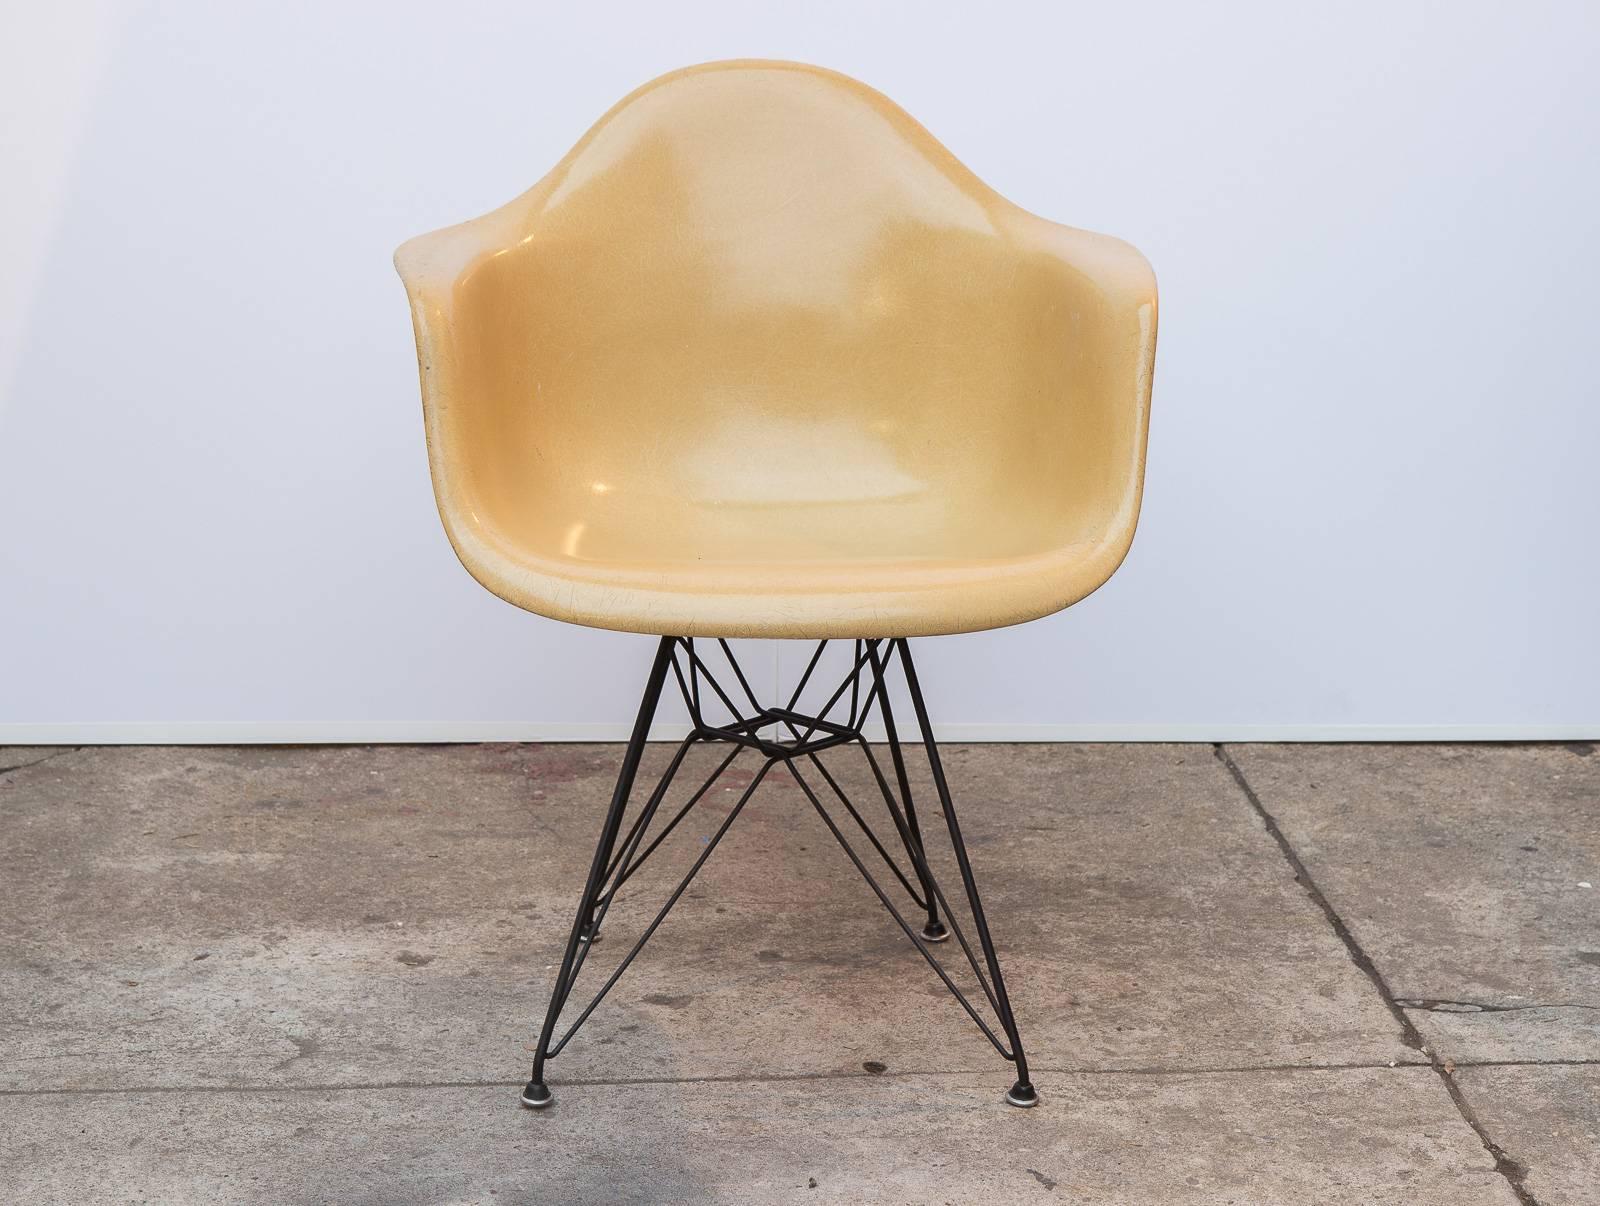 Original 1960s molded fiberglass armchair on black Eiffel base, designed by Charles and Ray Eames for Herman Miller. In a gorgeous butterscotch yellow colorway, with distinct thread texture. Finish is in original condition.  Shown here mounted on